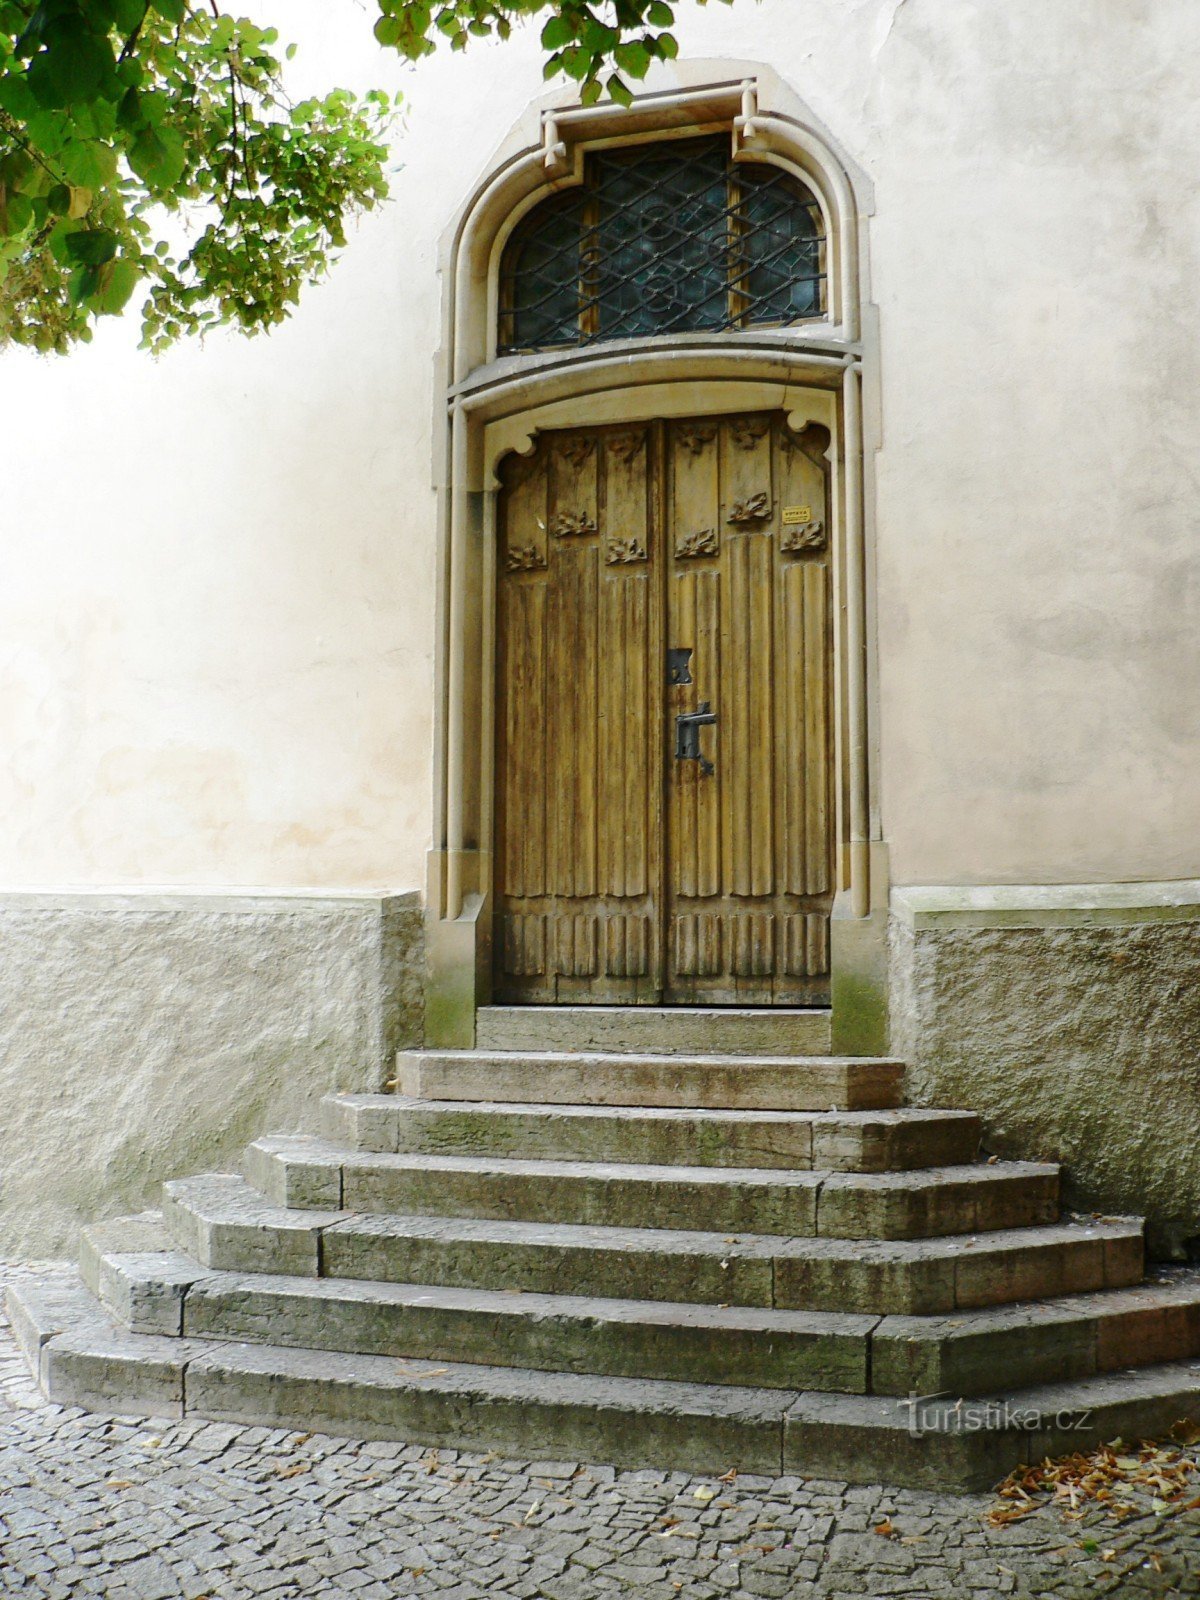 entrance to the sacristy of the church, which was newly opened after 1901, according to